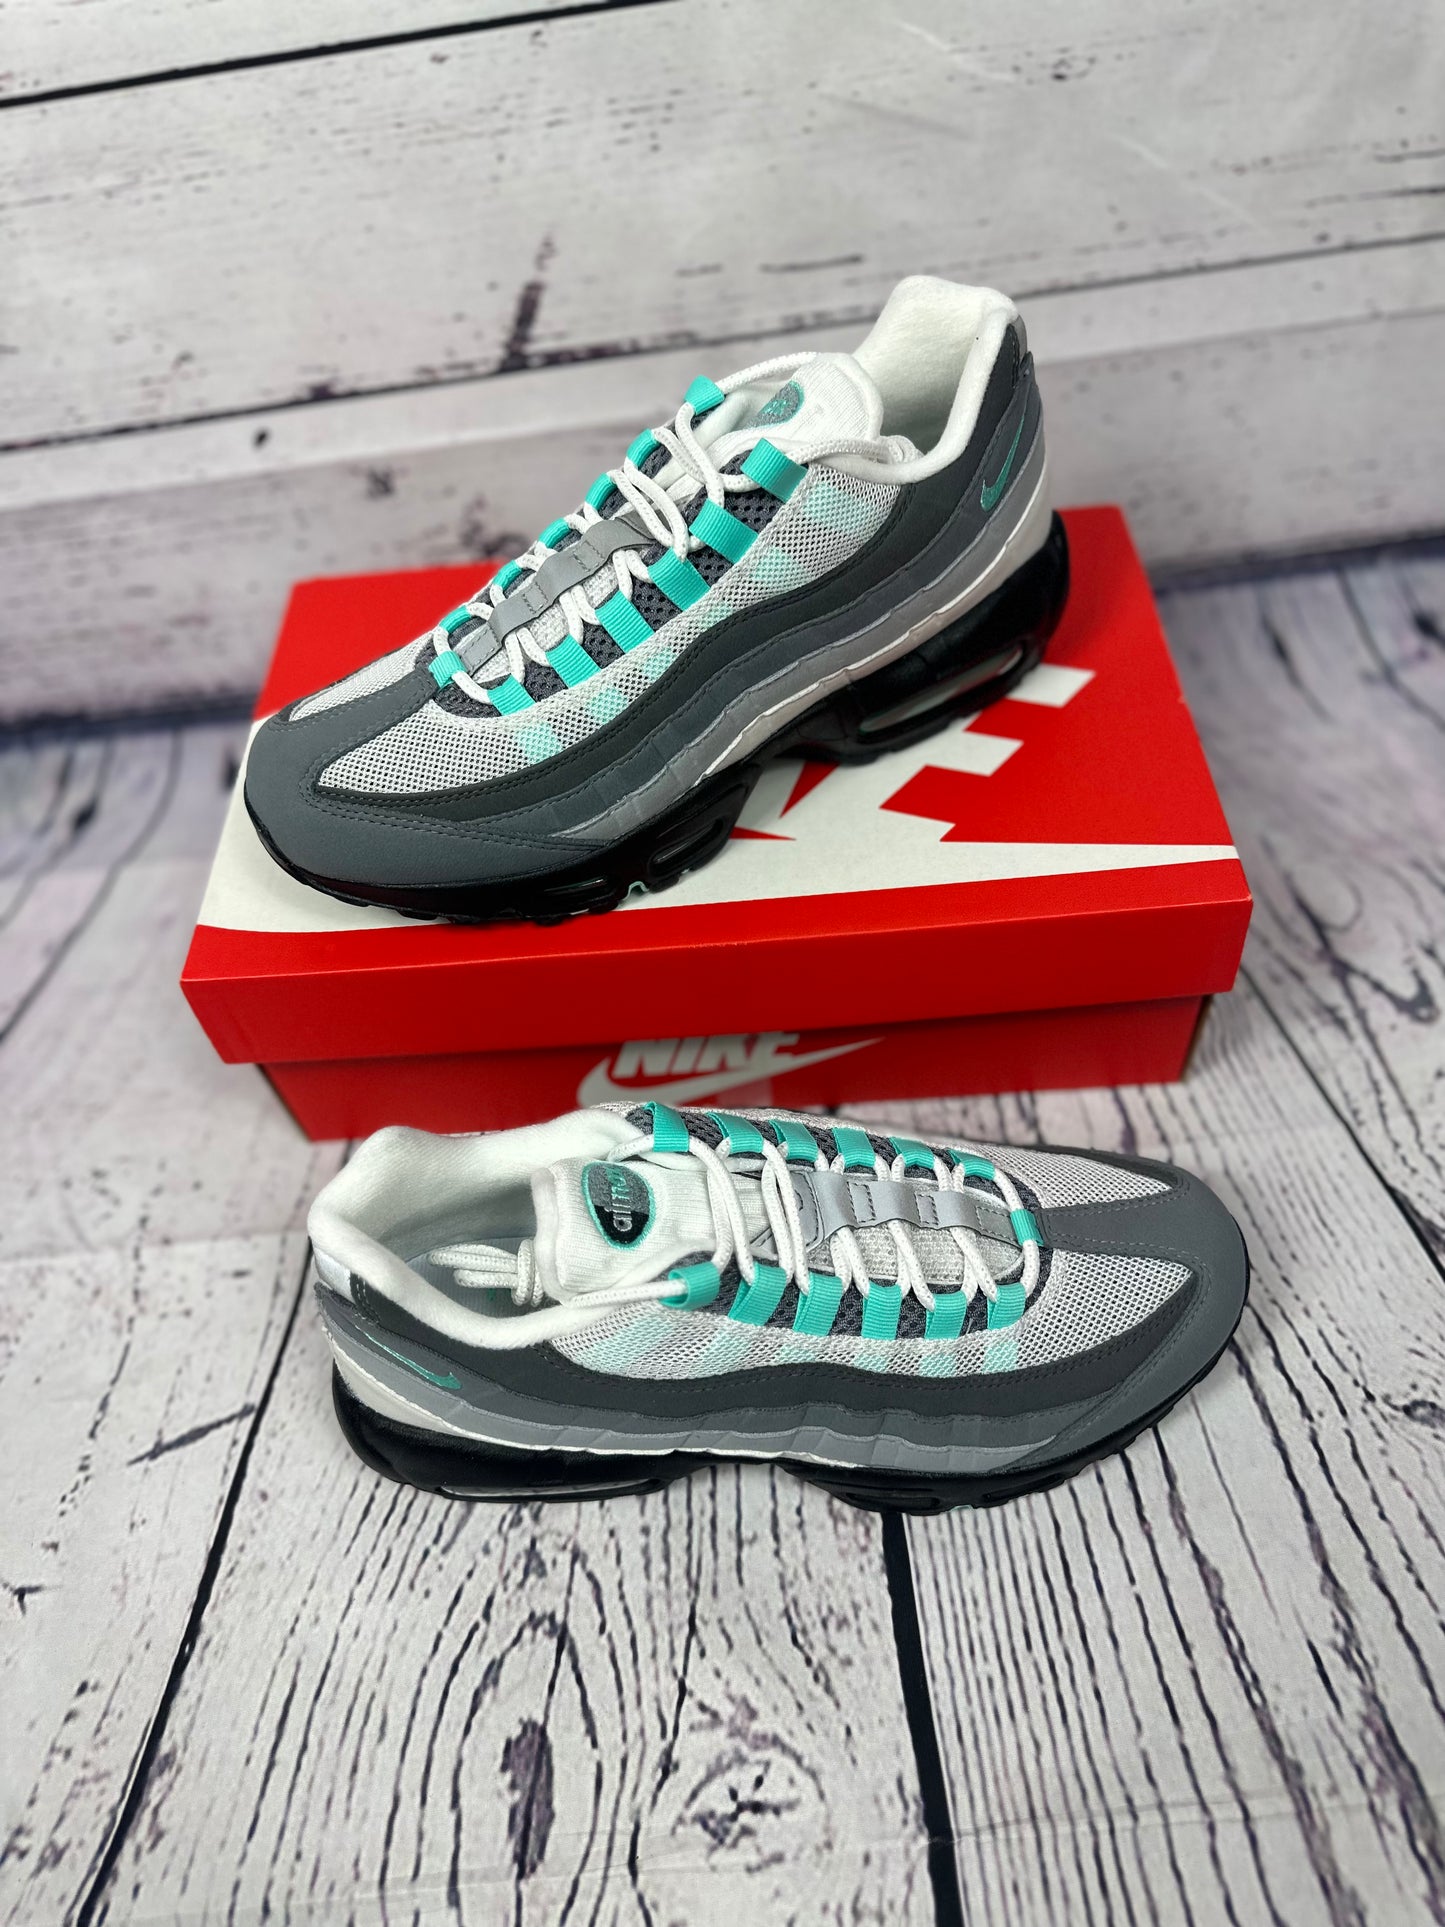 NIKE AIRMAX 95, best sports shoes, designer trainers